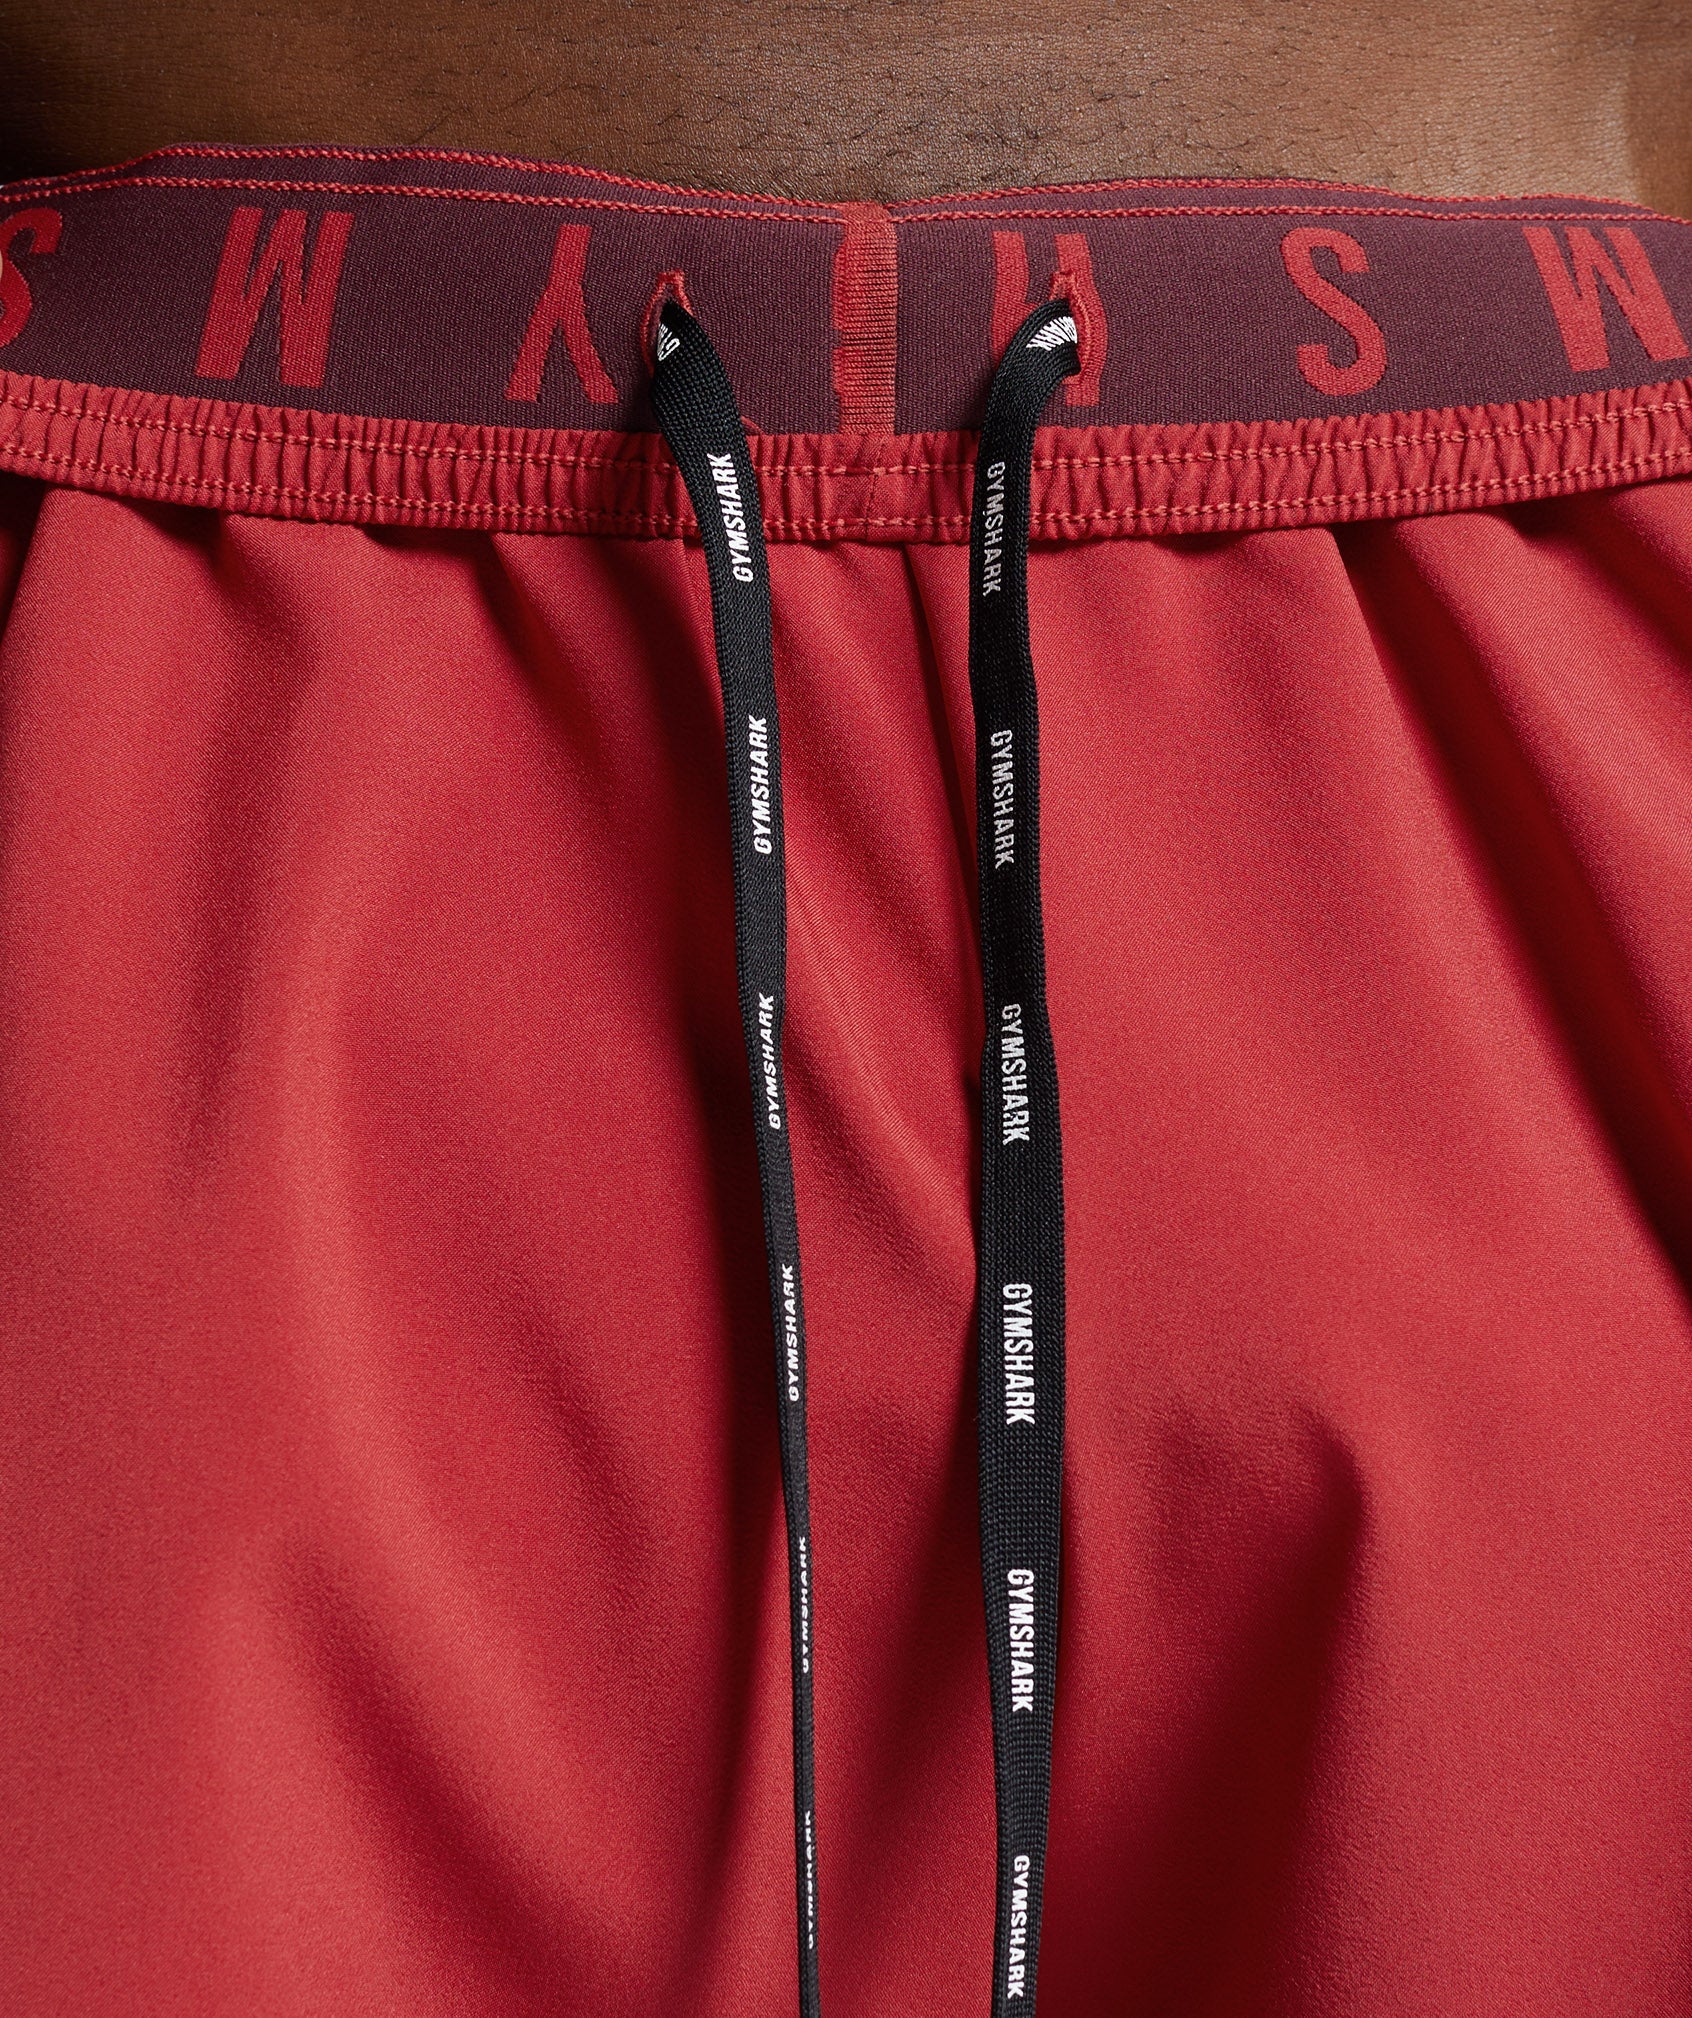 Sport 5" Shorts in Salsa Red/ Baked Maroon